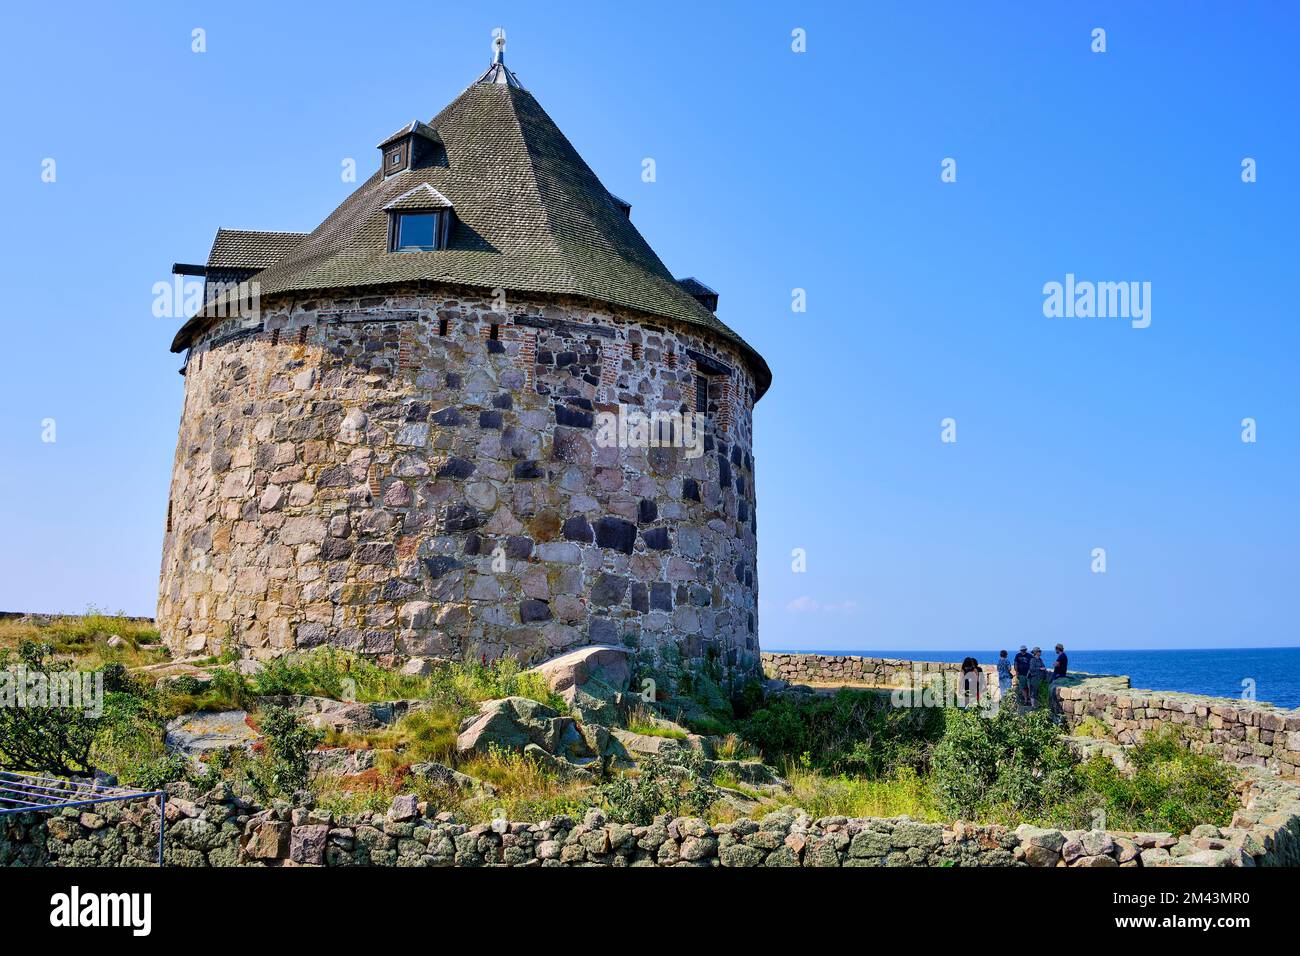 Out and about on the Ertholmen islands, Little Tower, historical fortification structures on Frederiksö, Ertholmene, Denmark, Scandinavia, Europe. Stock Photo